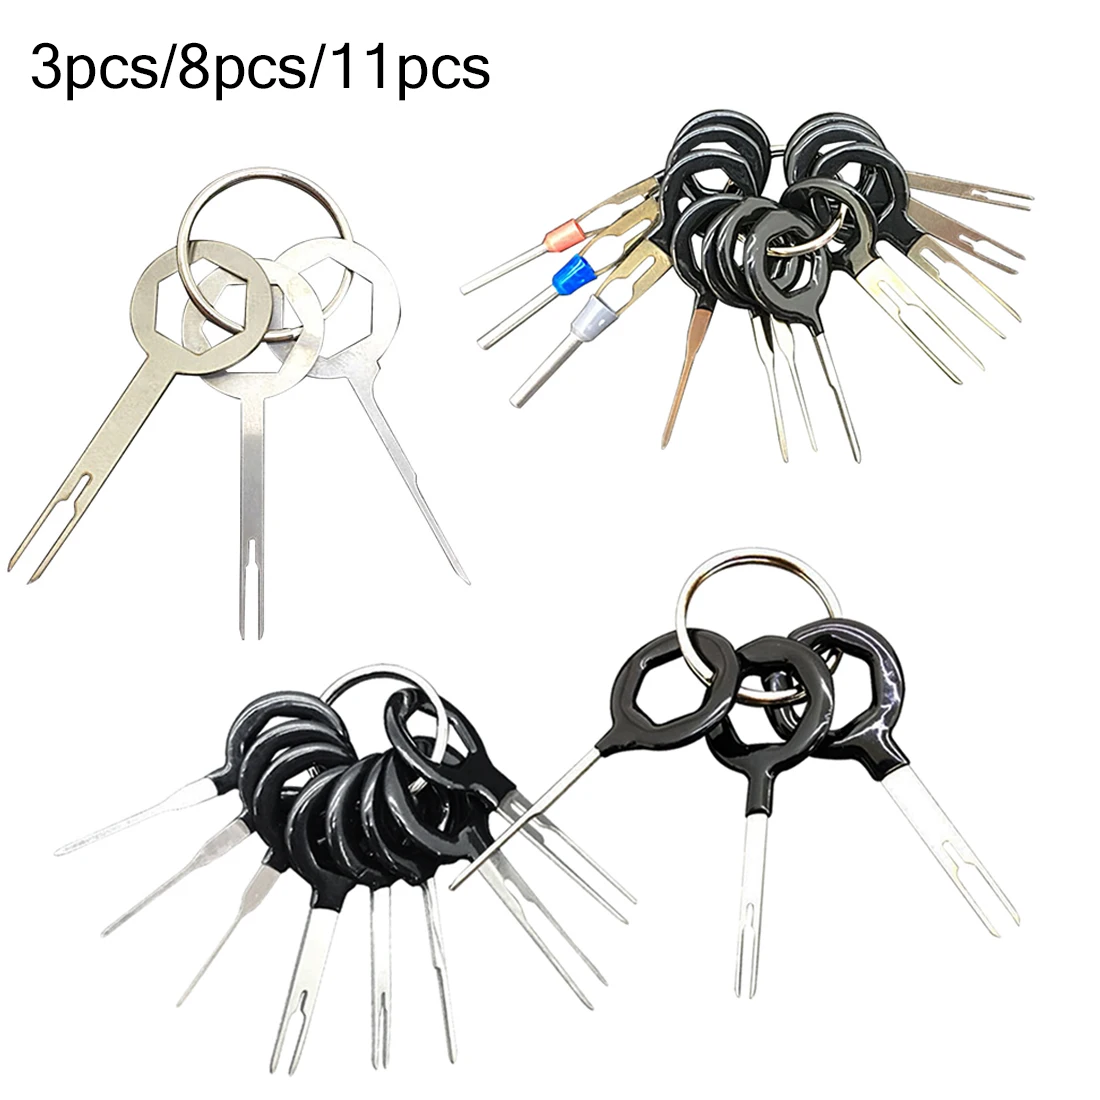 

11pcs Car Terminal Removal Electrical Wiring Crimp Connector Pin Extractor Kit Car Electrico Repair Hand Tools Pin connector